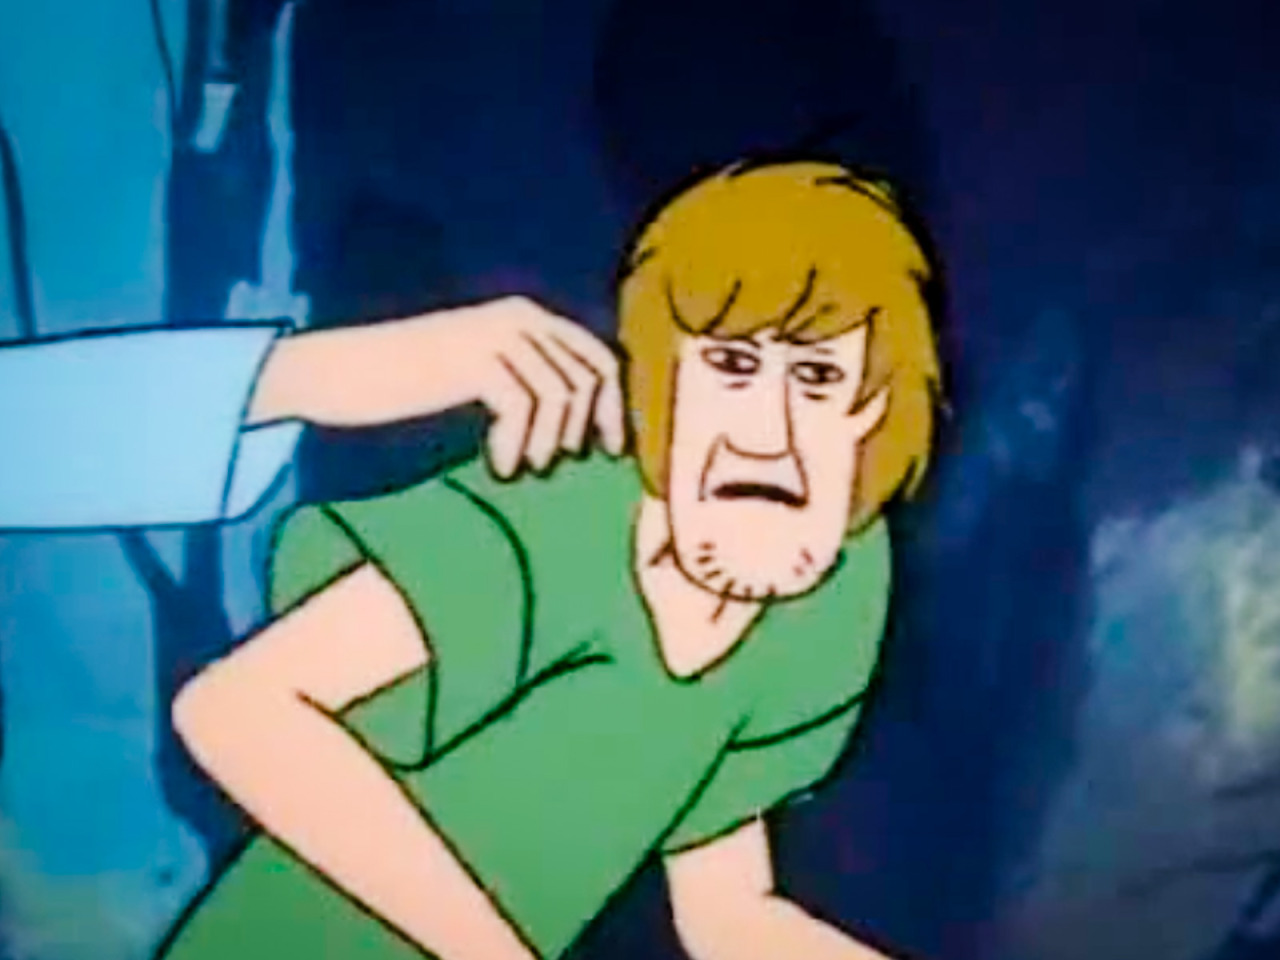 I saw this old screencap of Shaggy and had to draw Lucifer making the same face...